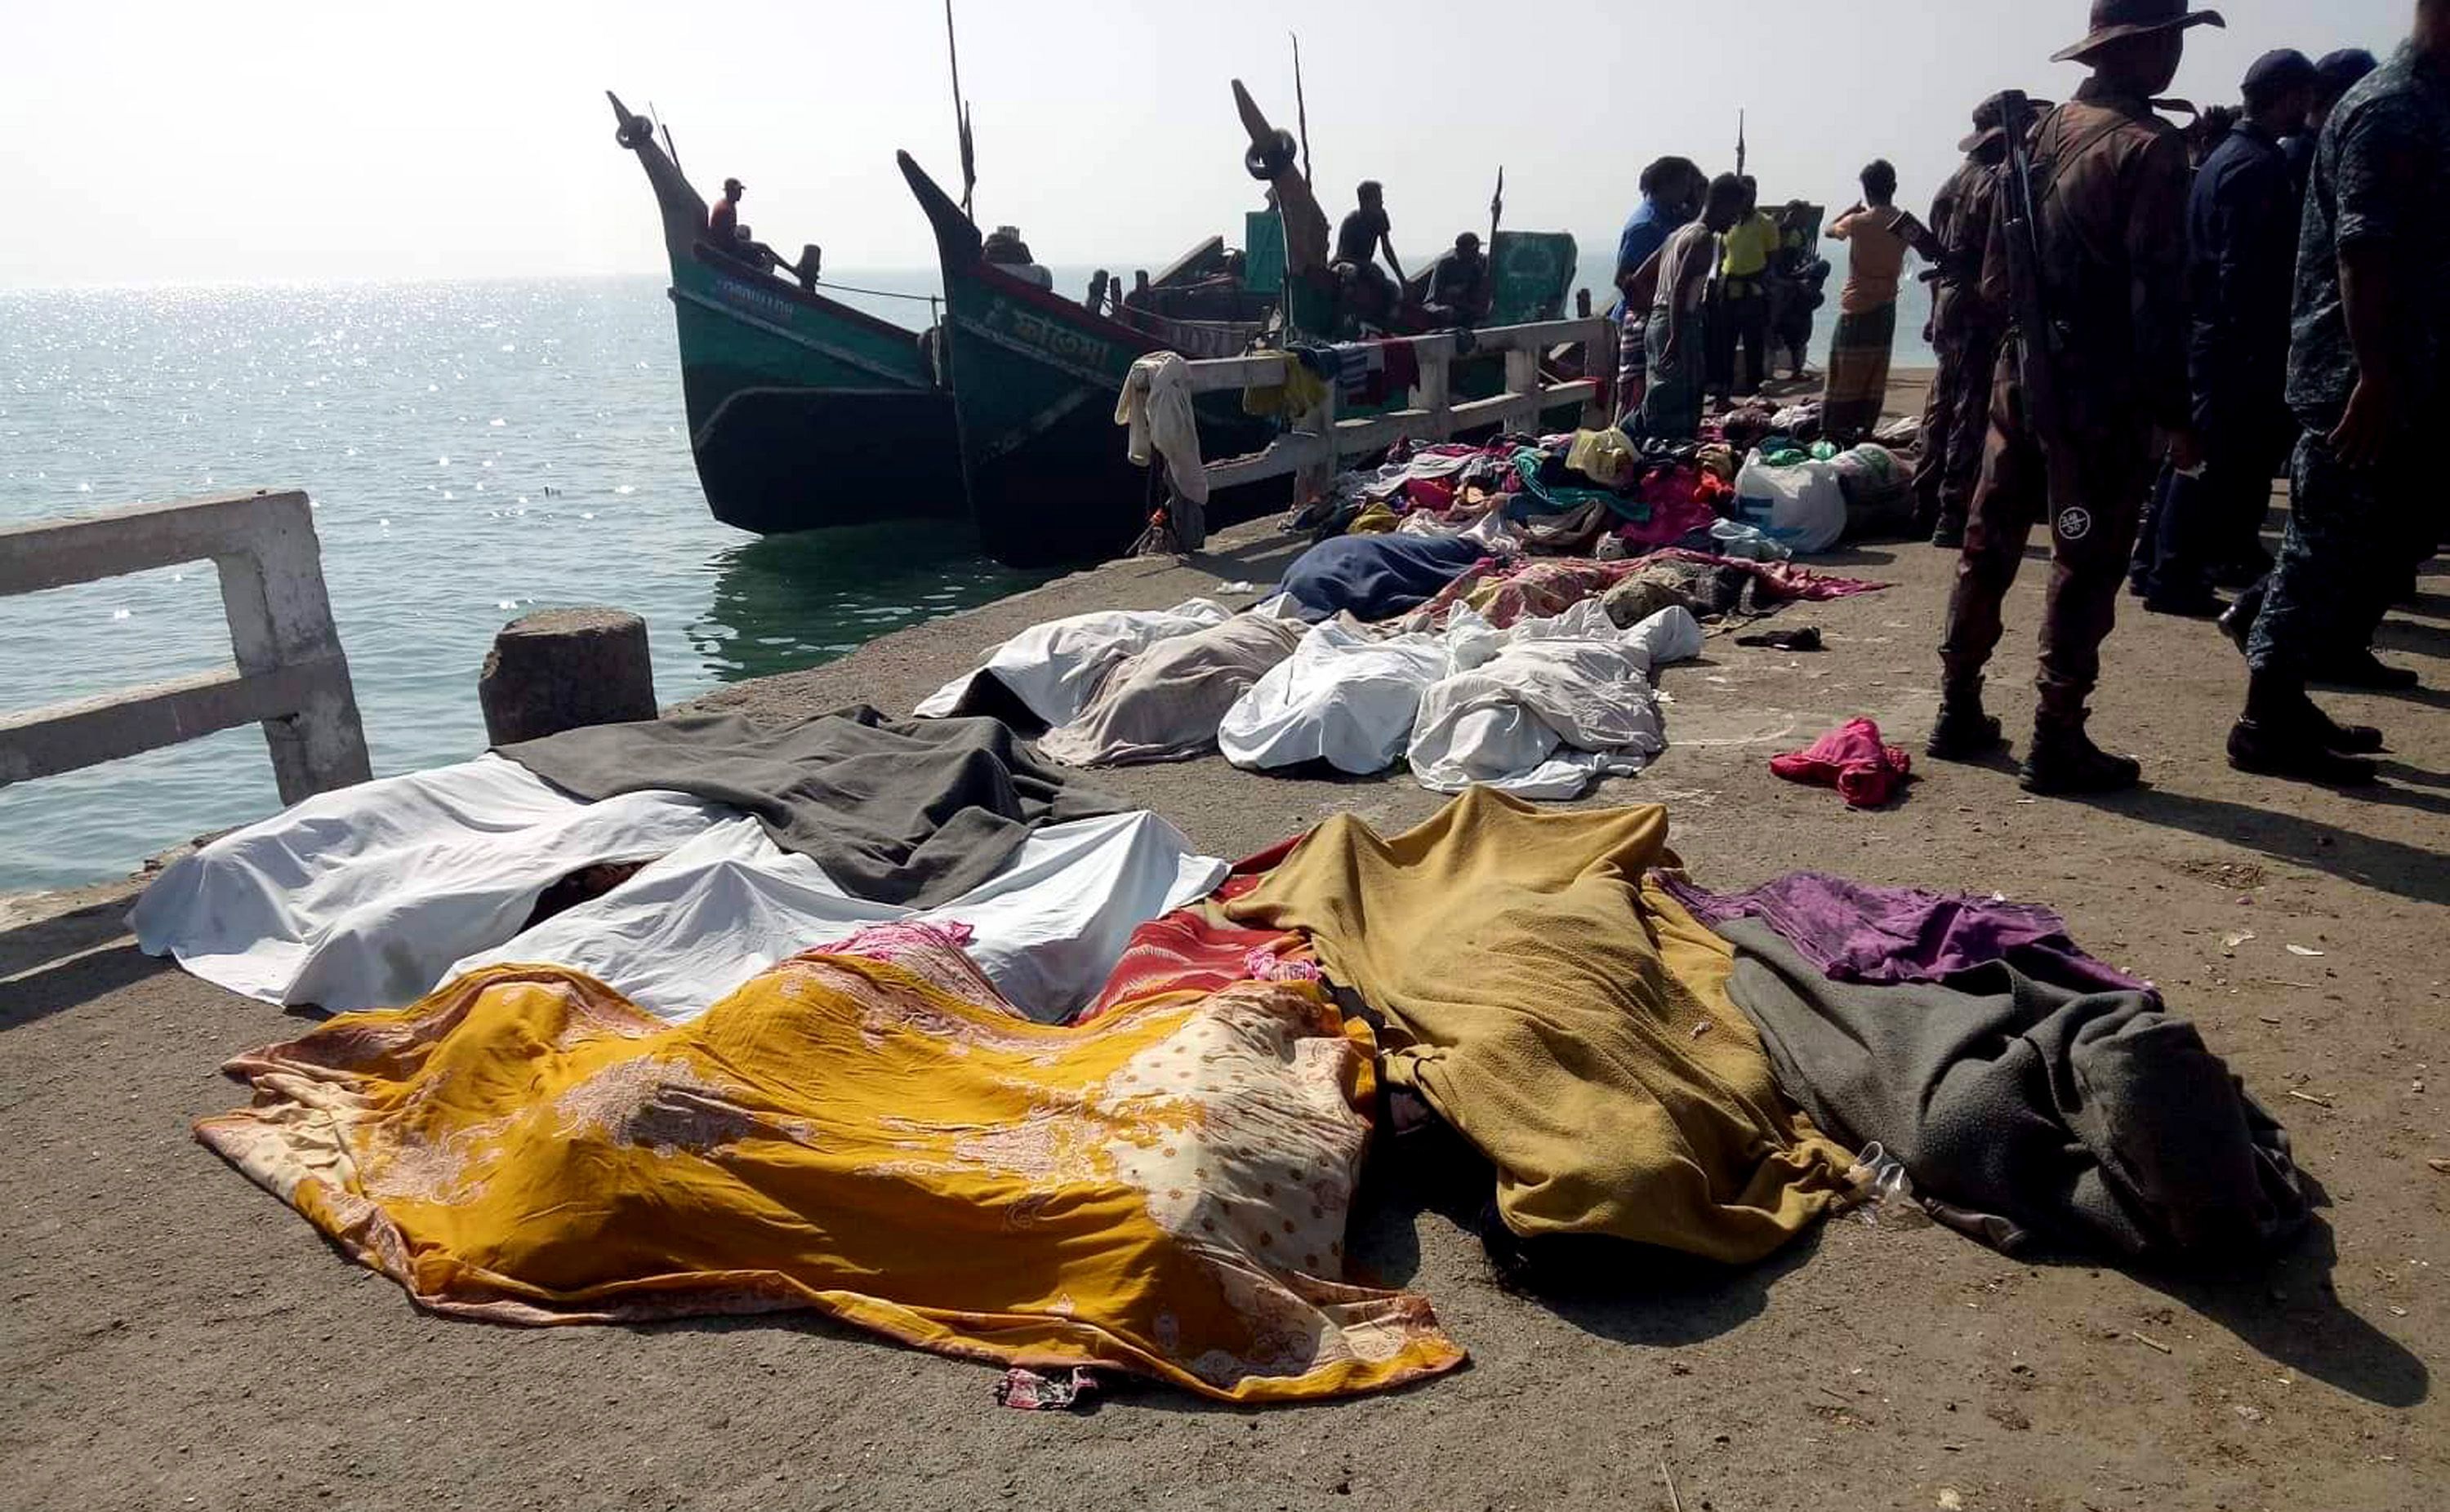 Mandatory Credit: Photo by STRINGER/EPA-EFE/Shutterstock (10553703a)nA view of victims' bodies covered in sheets lying on a quay after a trawler capsized off the Bay of Bengal, in Teknaf, Cox's Bazar District, Bangladesh, 11 February 2020. According to local media reports, at least 15 Rohingya refugees died after a trawler on its way to Malaysia sank off the coast in the Bay of Bengal, near St Martin's Island. Some 65 people were said to have been rescued alive, media added. The victims are said to be mostly women from Rohingya camps located in Teknaf and Ukhia Upazila of Cox's Bazar.nAt least 15 dead after boat carrying Rohingya refugees capsizes off Bangladesh, Teknaf - 11 Feb 2020